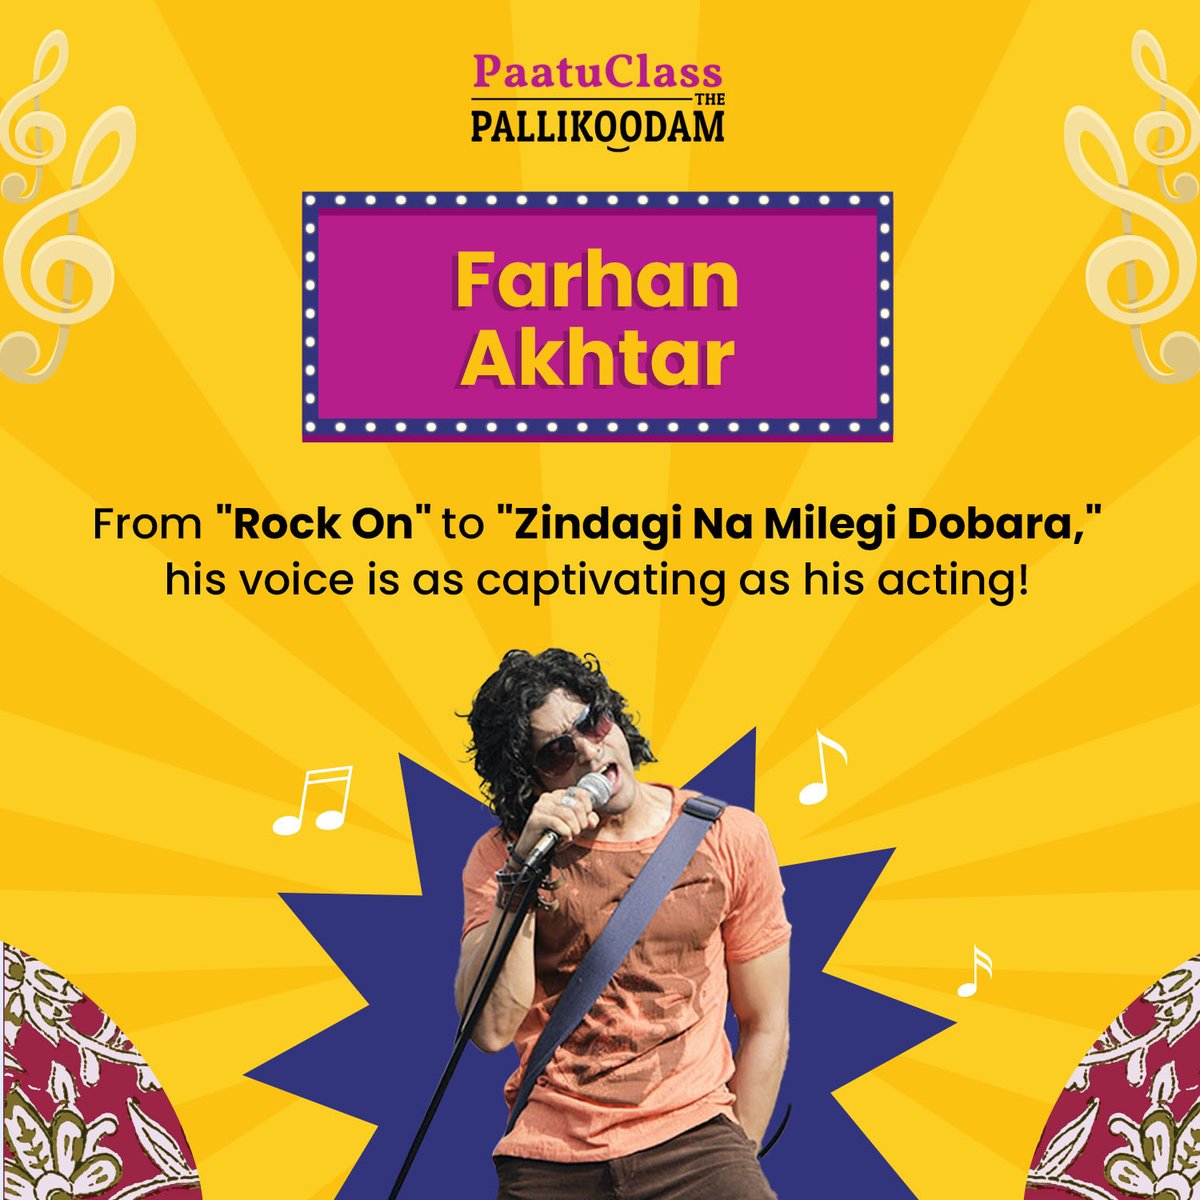 These stars prove that talent knows no bounds! Who's your favourite singing actor? Drop a comment below!

#ThePallikoodam #PaatuClass #VocalTraining #VocalTechnique #Music #OnlineMusicLessons #VoiceLessons #Singing #OnlineLessons #MusicTeachers #Voice #VoiceTraining